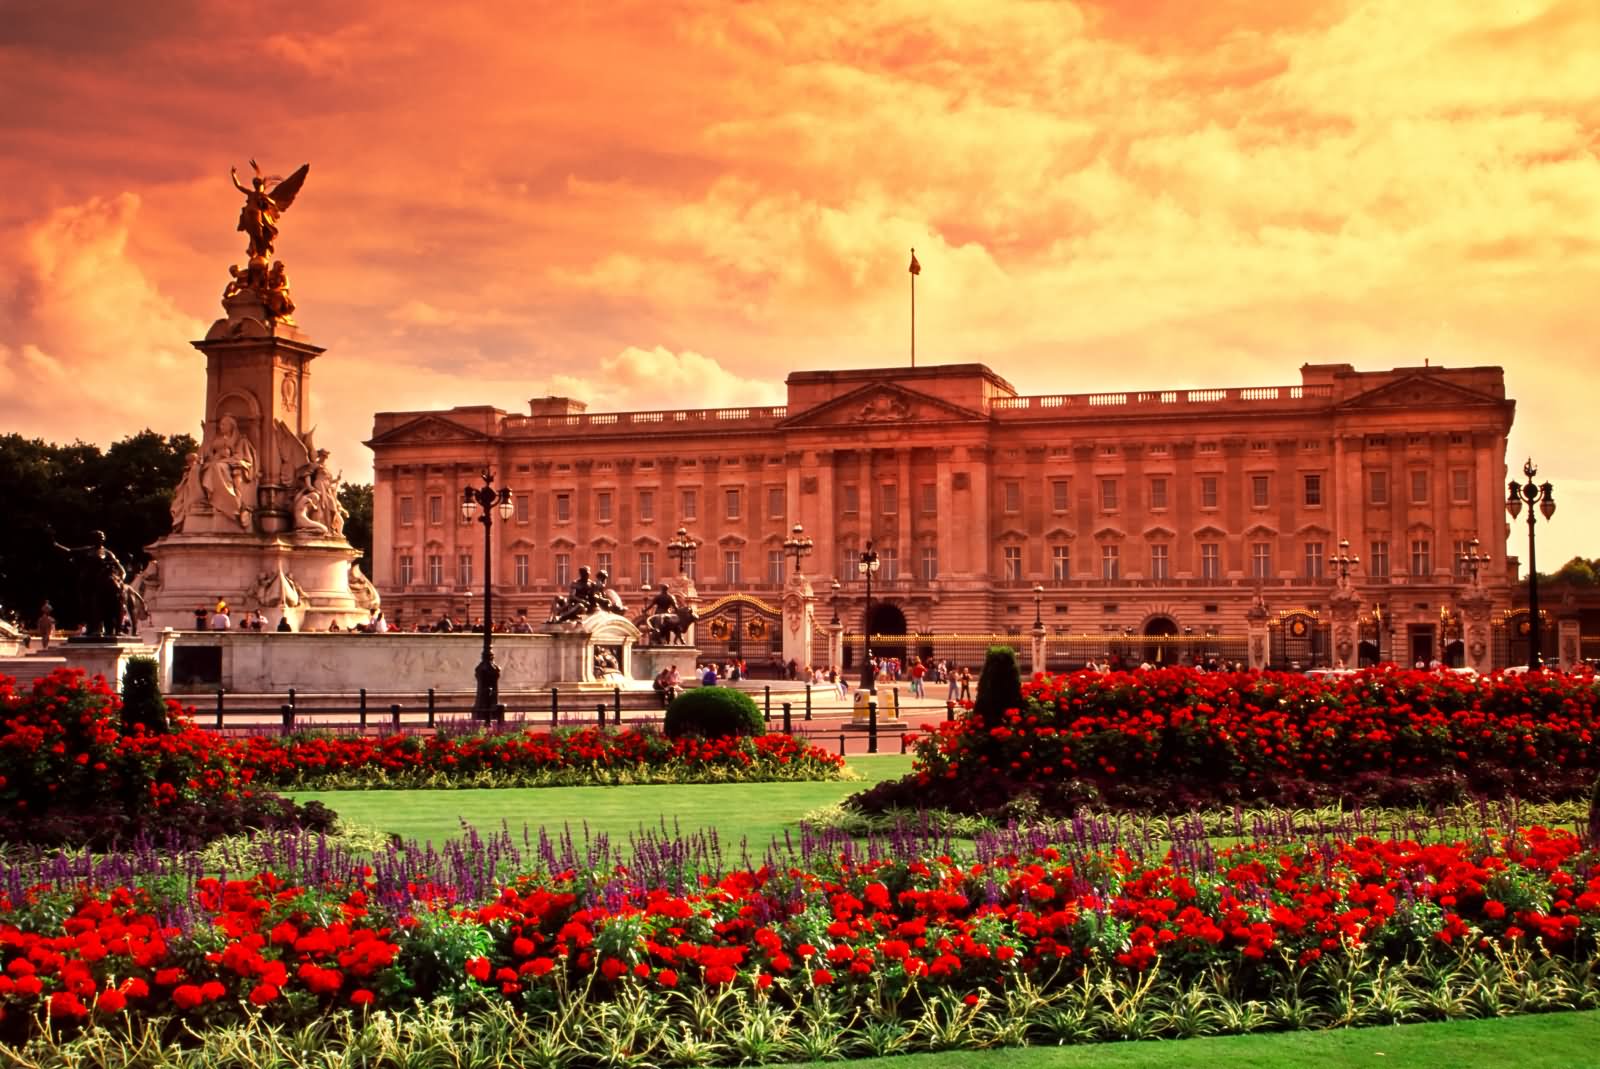 Sunset View Of The Buckingham Palace